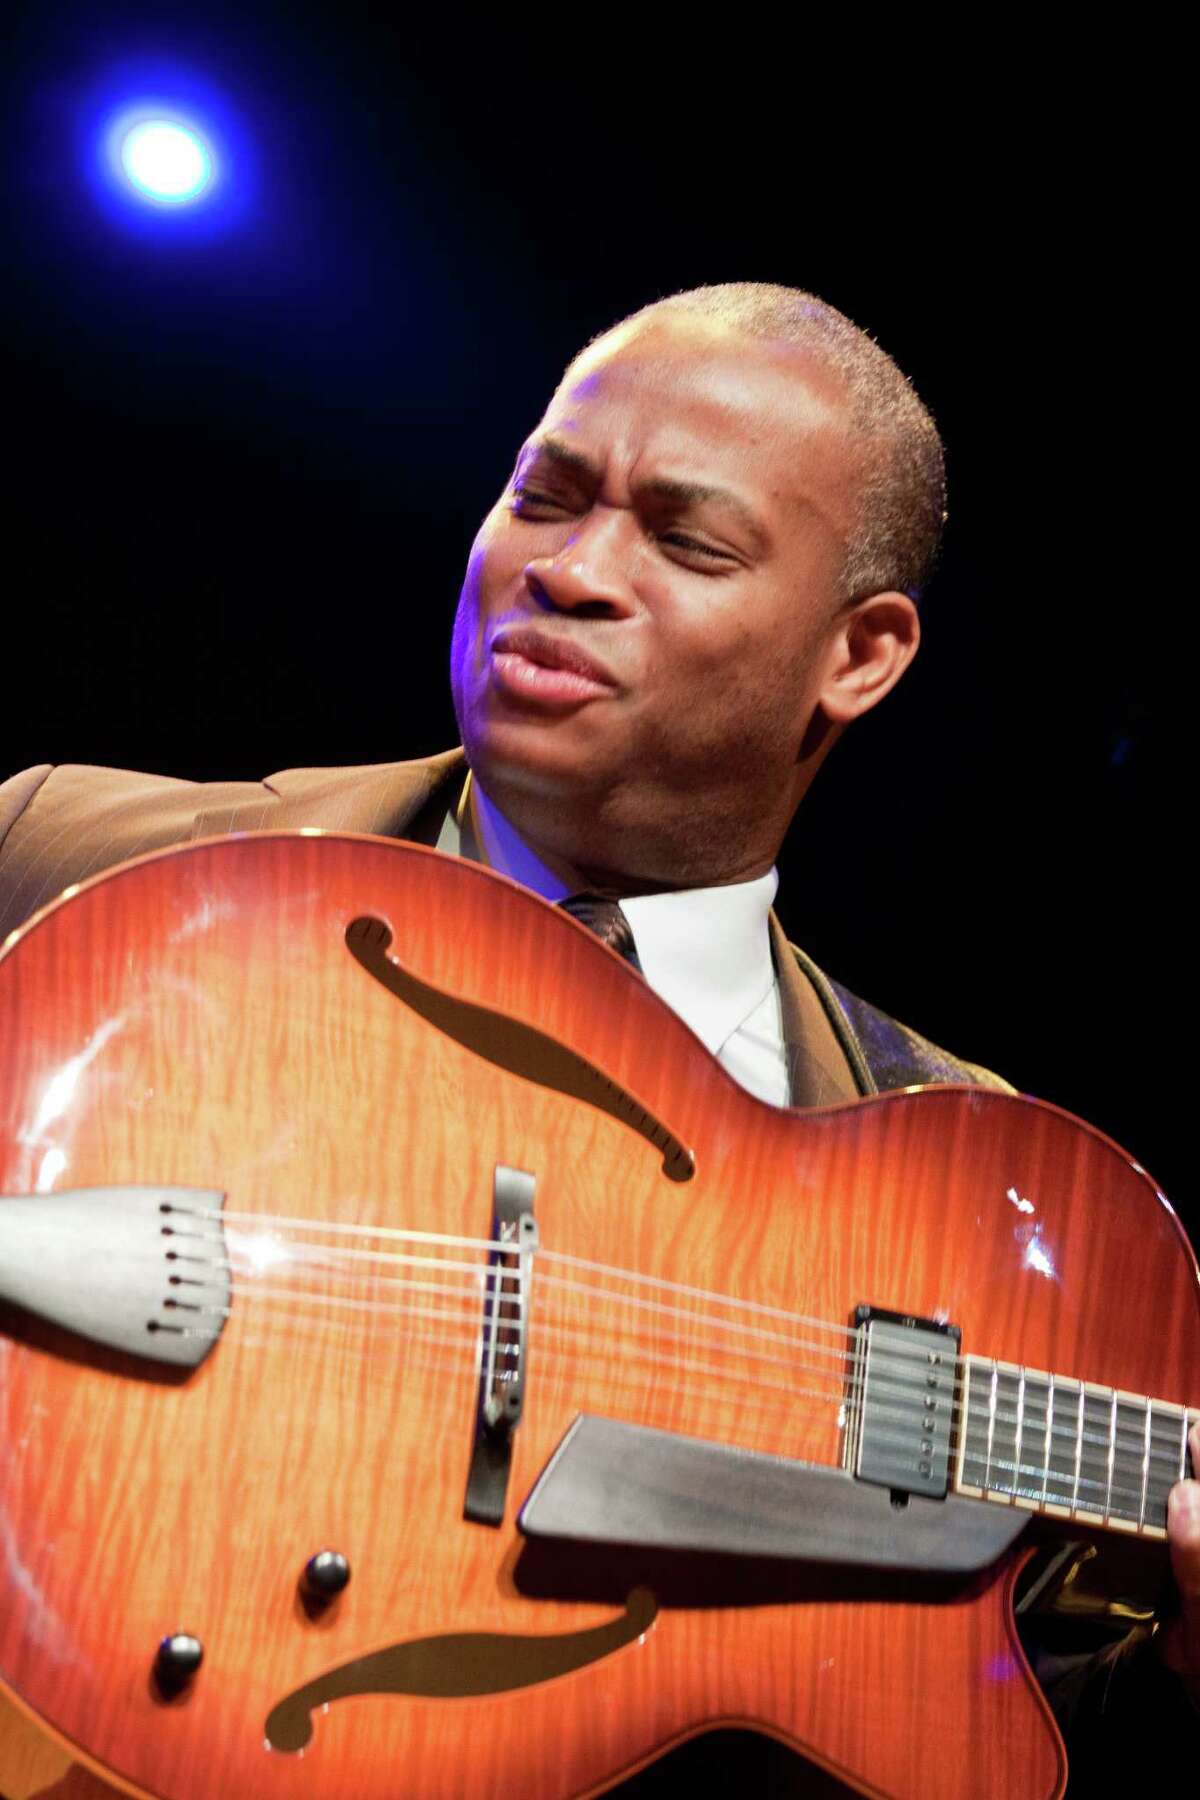 Guitarist Russell Malone will make a special guest appearance with Bennie Wallace's Disorder at the Border All Star Jazz Orchestra in a blues-themed BackCountry Jazz benefit concert this Saturday night.